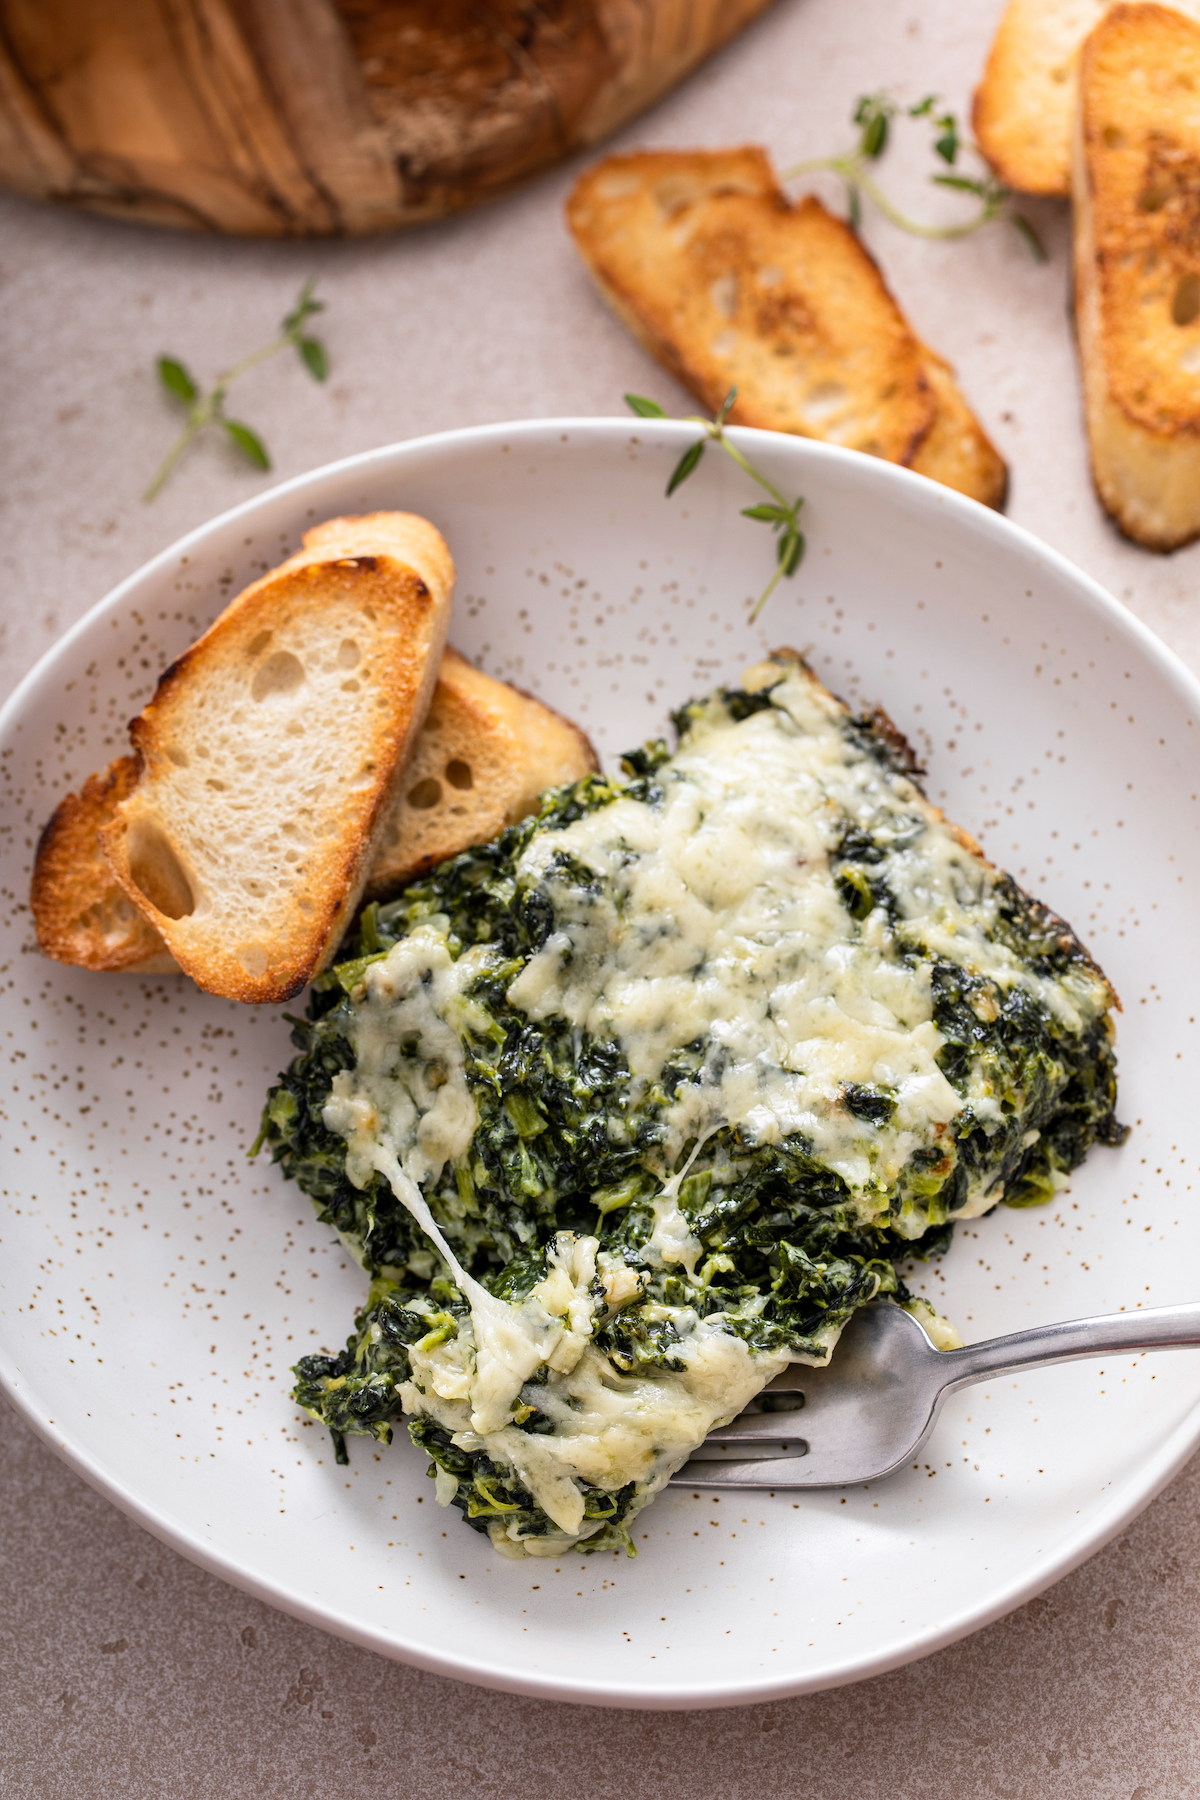 A serving of spinach gratin on a plate with a fork taking a bite.